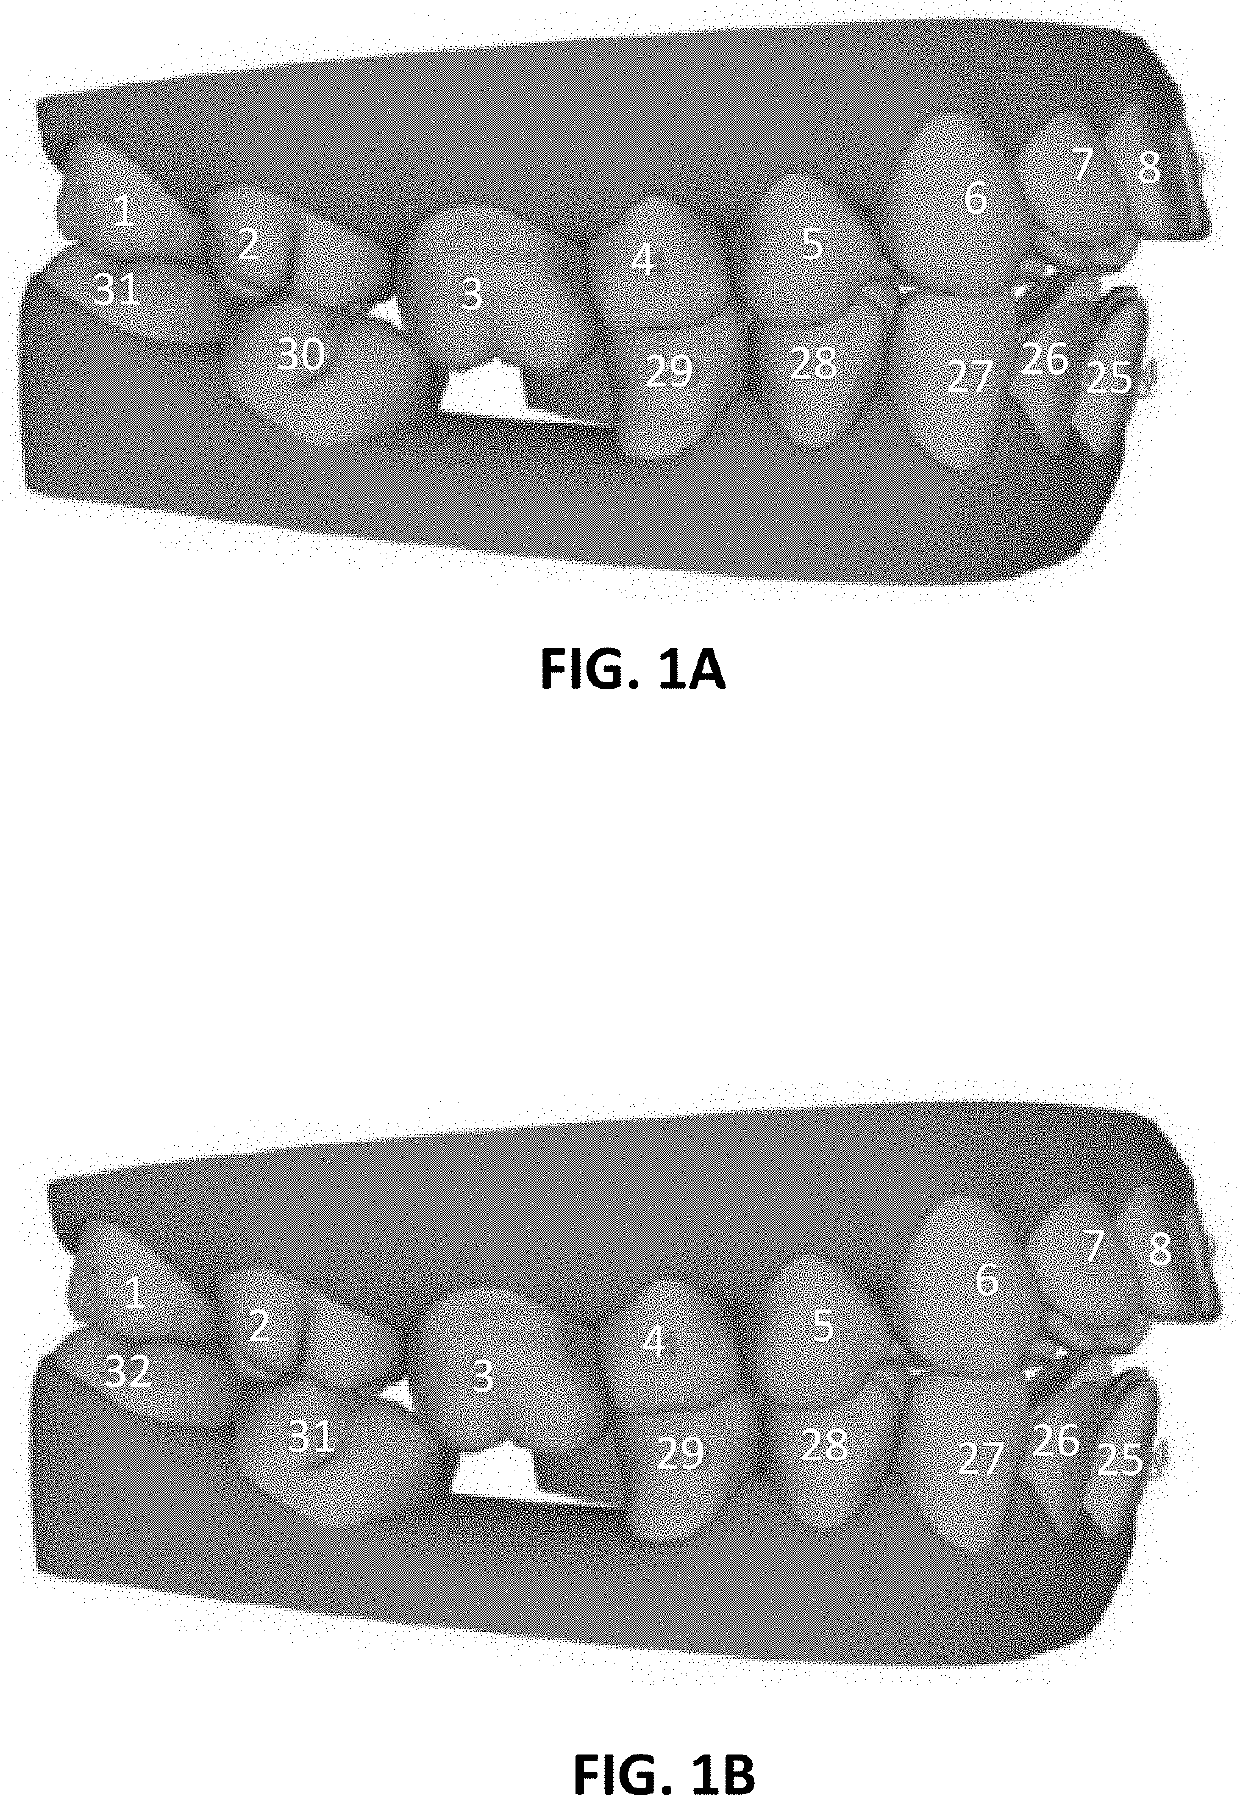 Dental arch analysis and tooth numbering